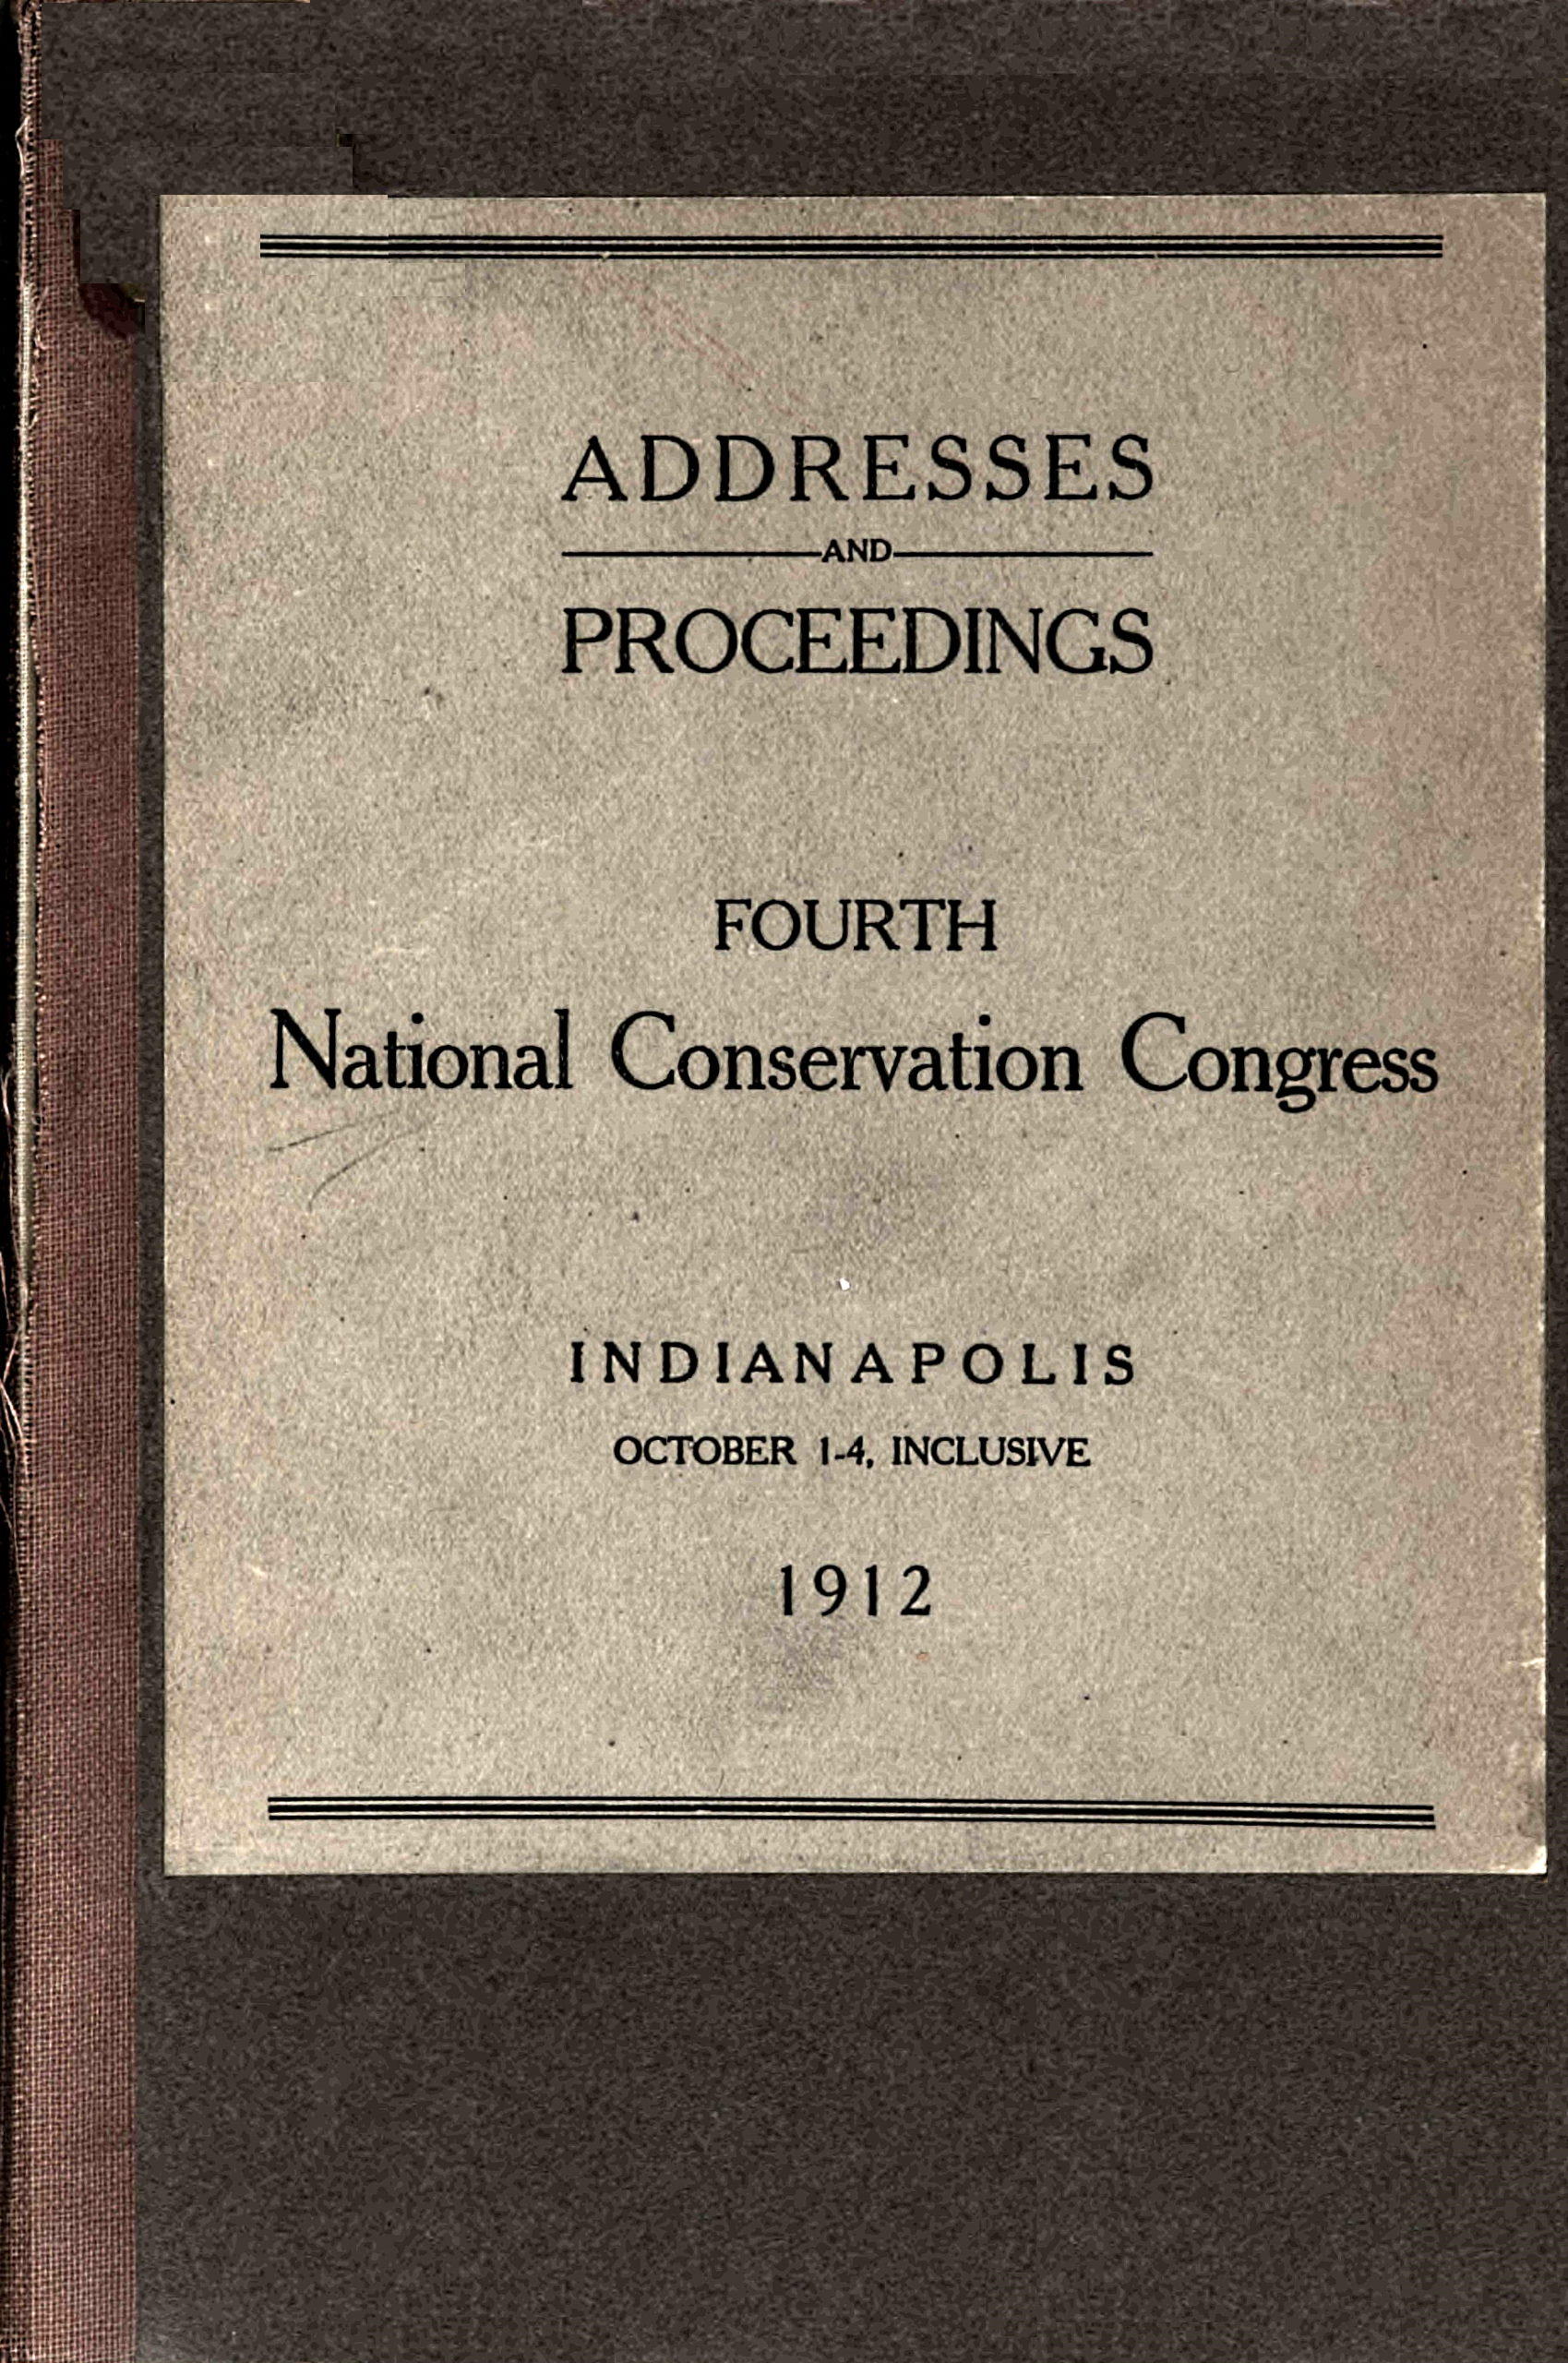 Proceedings [of the] fourth National Conservation Congress [at] Indianapolis, October 1-4, 1912